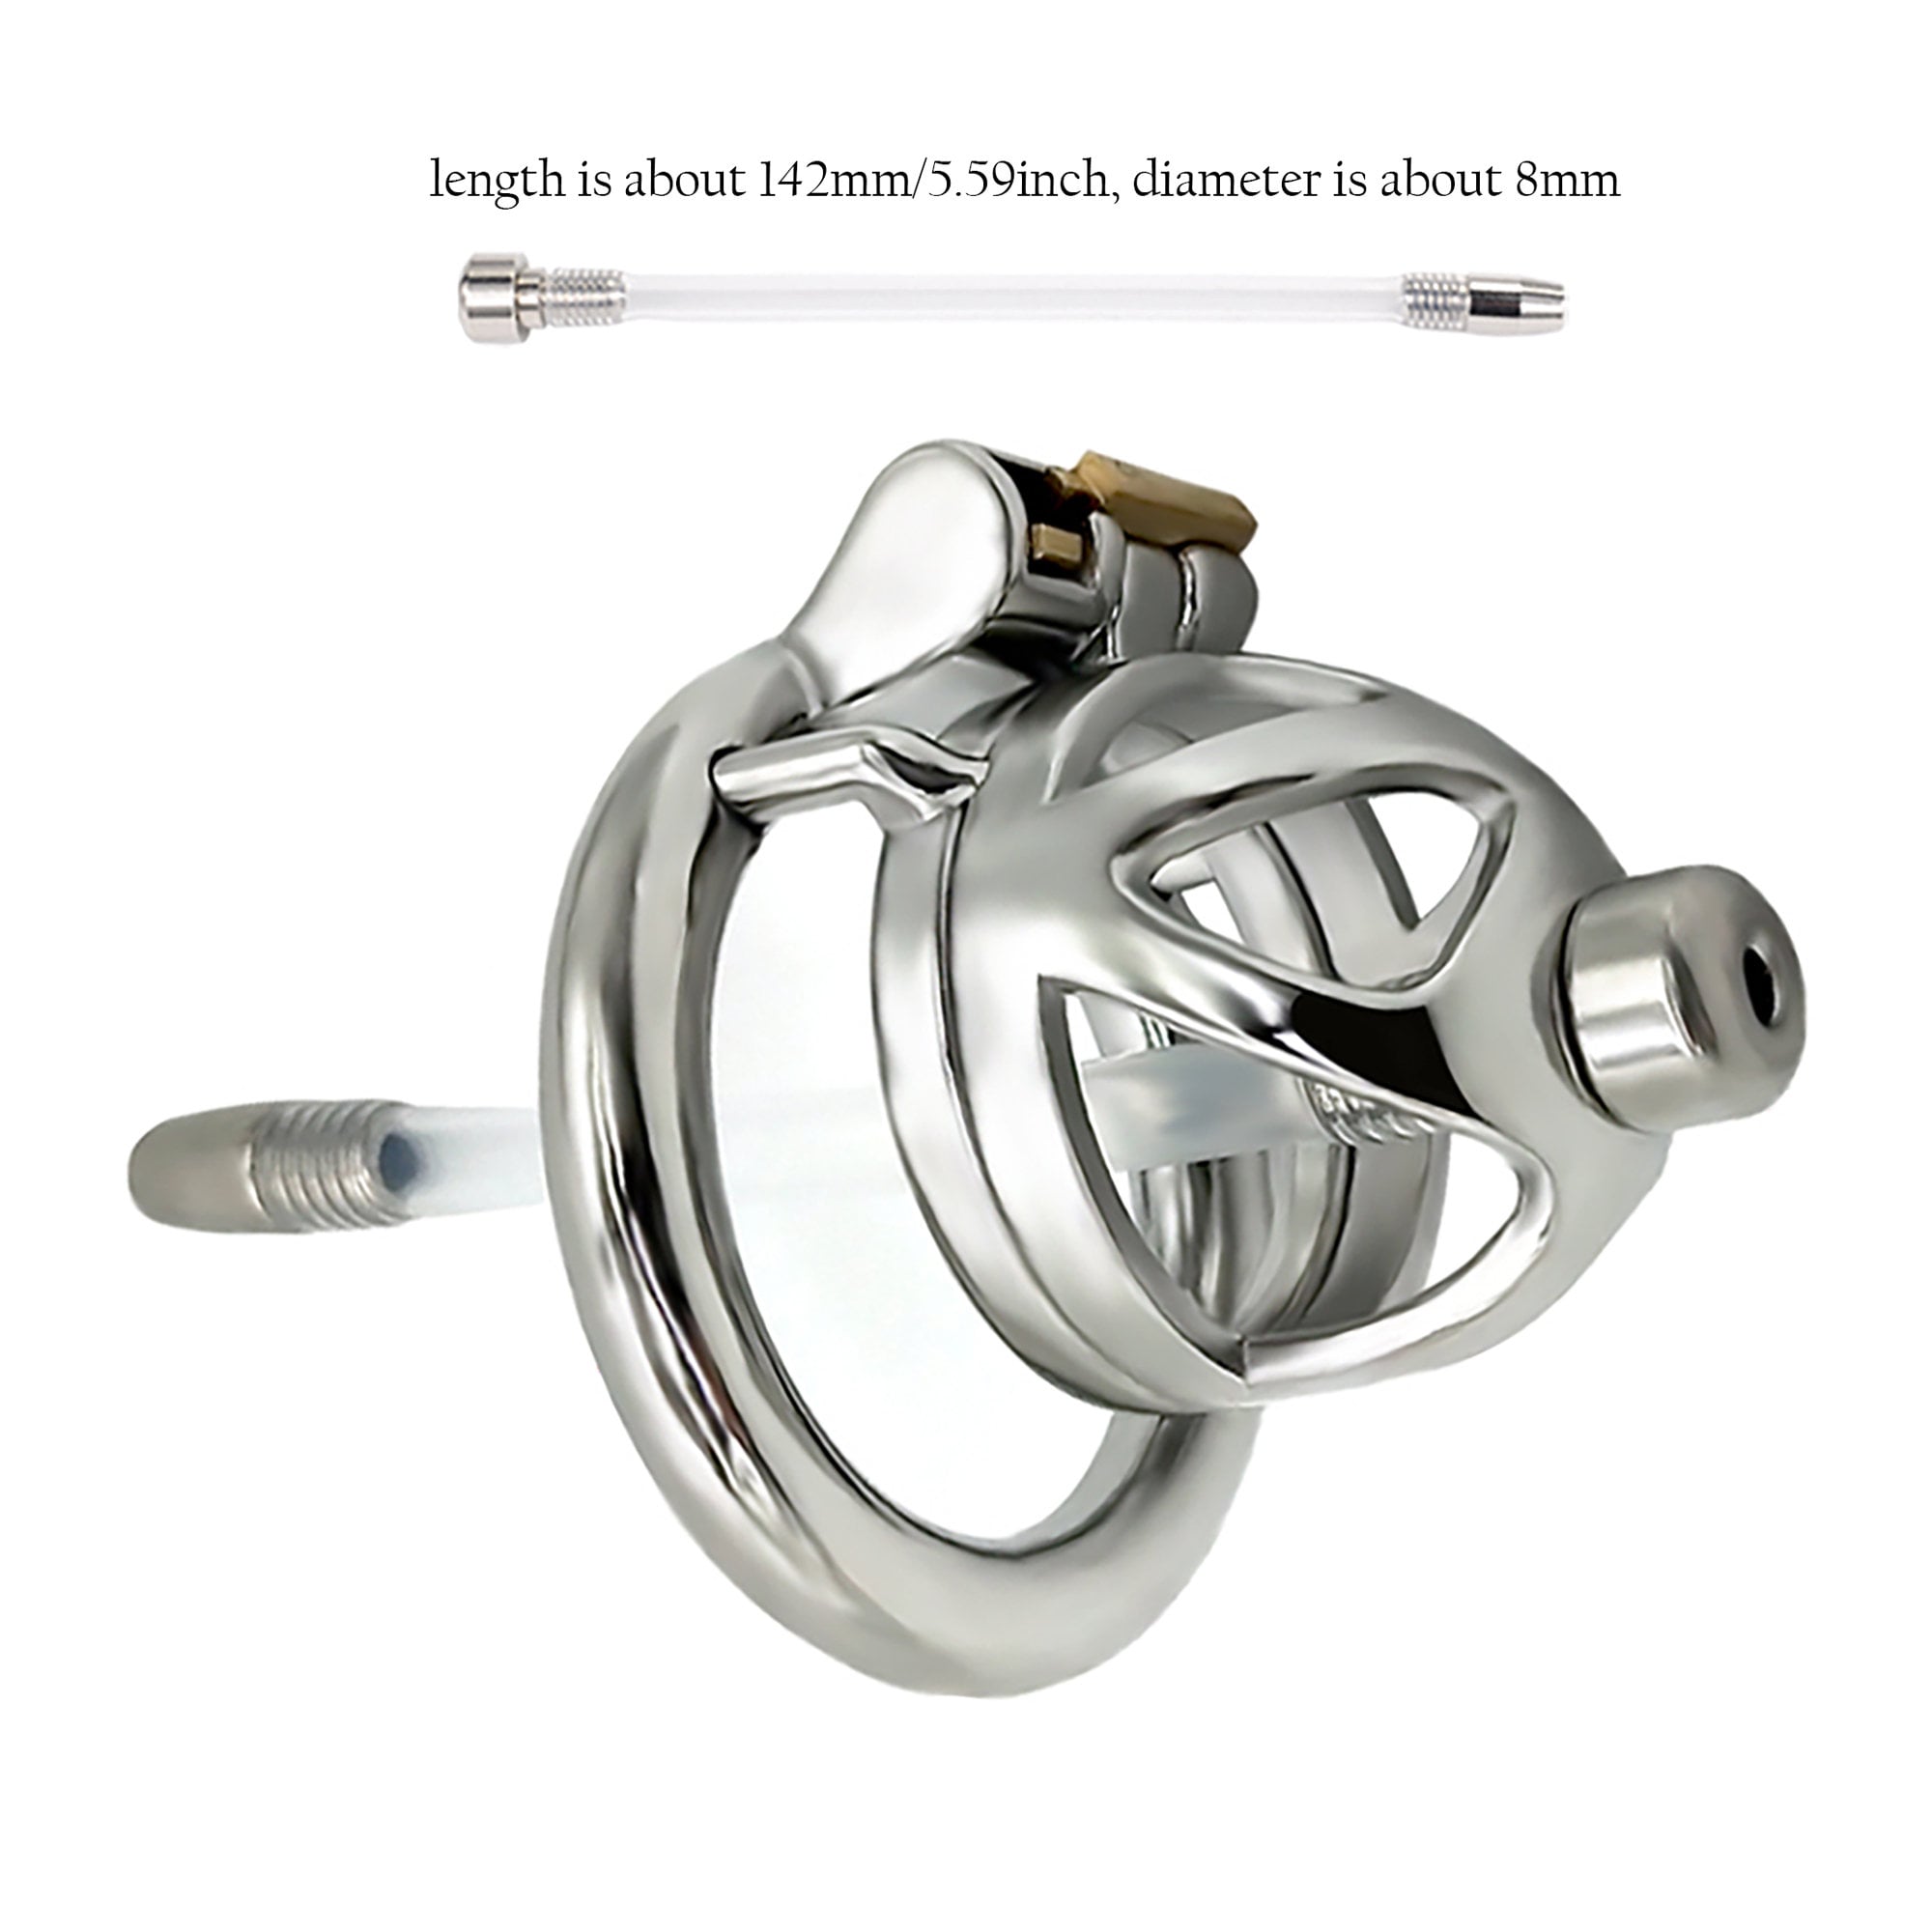 Small Chastity Belt Lock for Men Metal Cock Cage With Urethral